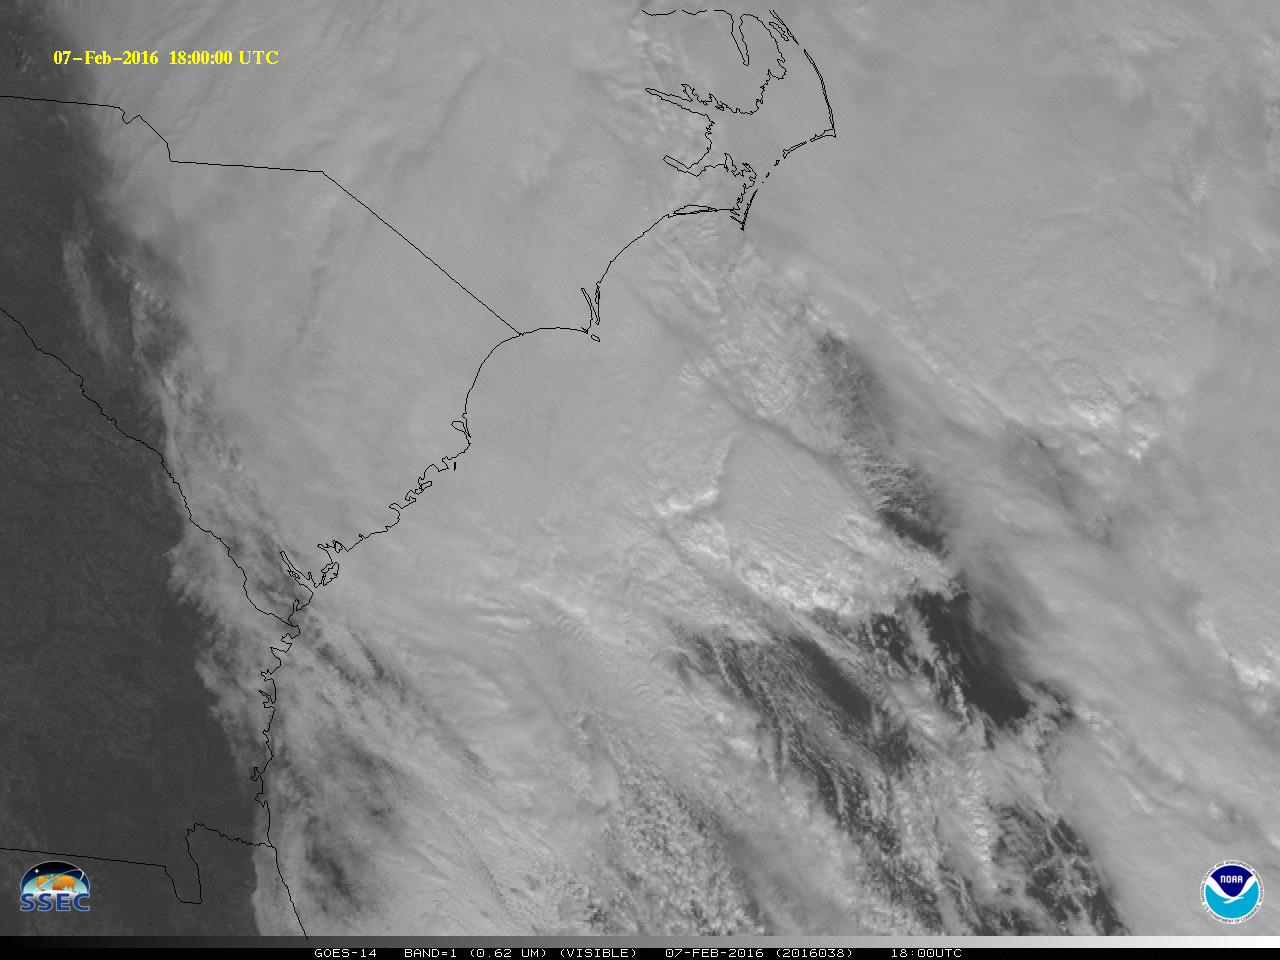 GOES-14 Visible (0.63 µm) images, 15-minute time-step [click to play animated gif]